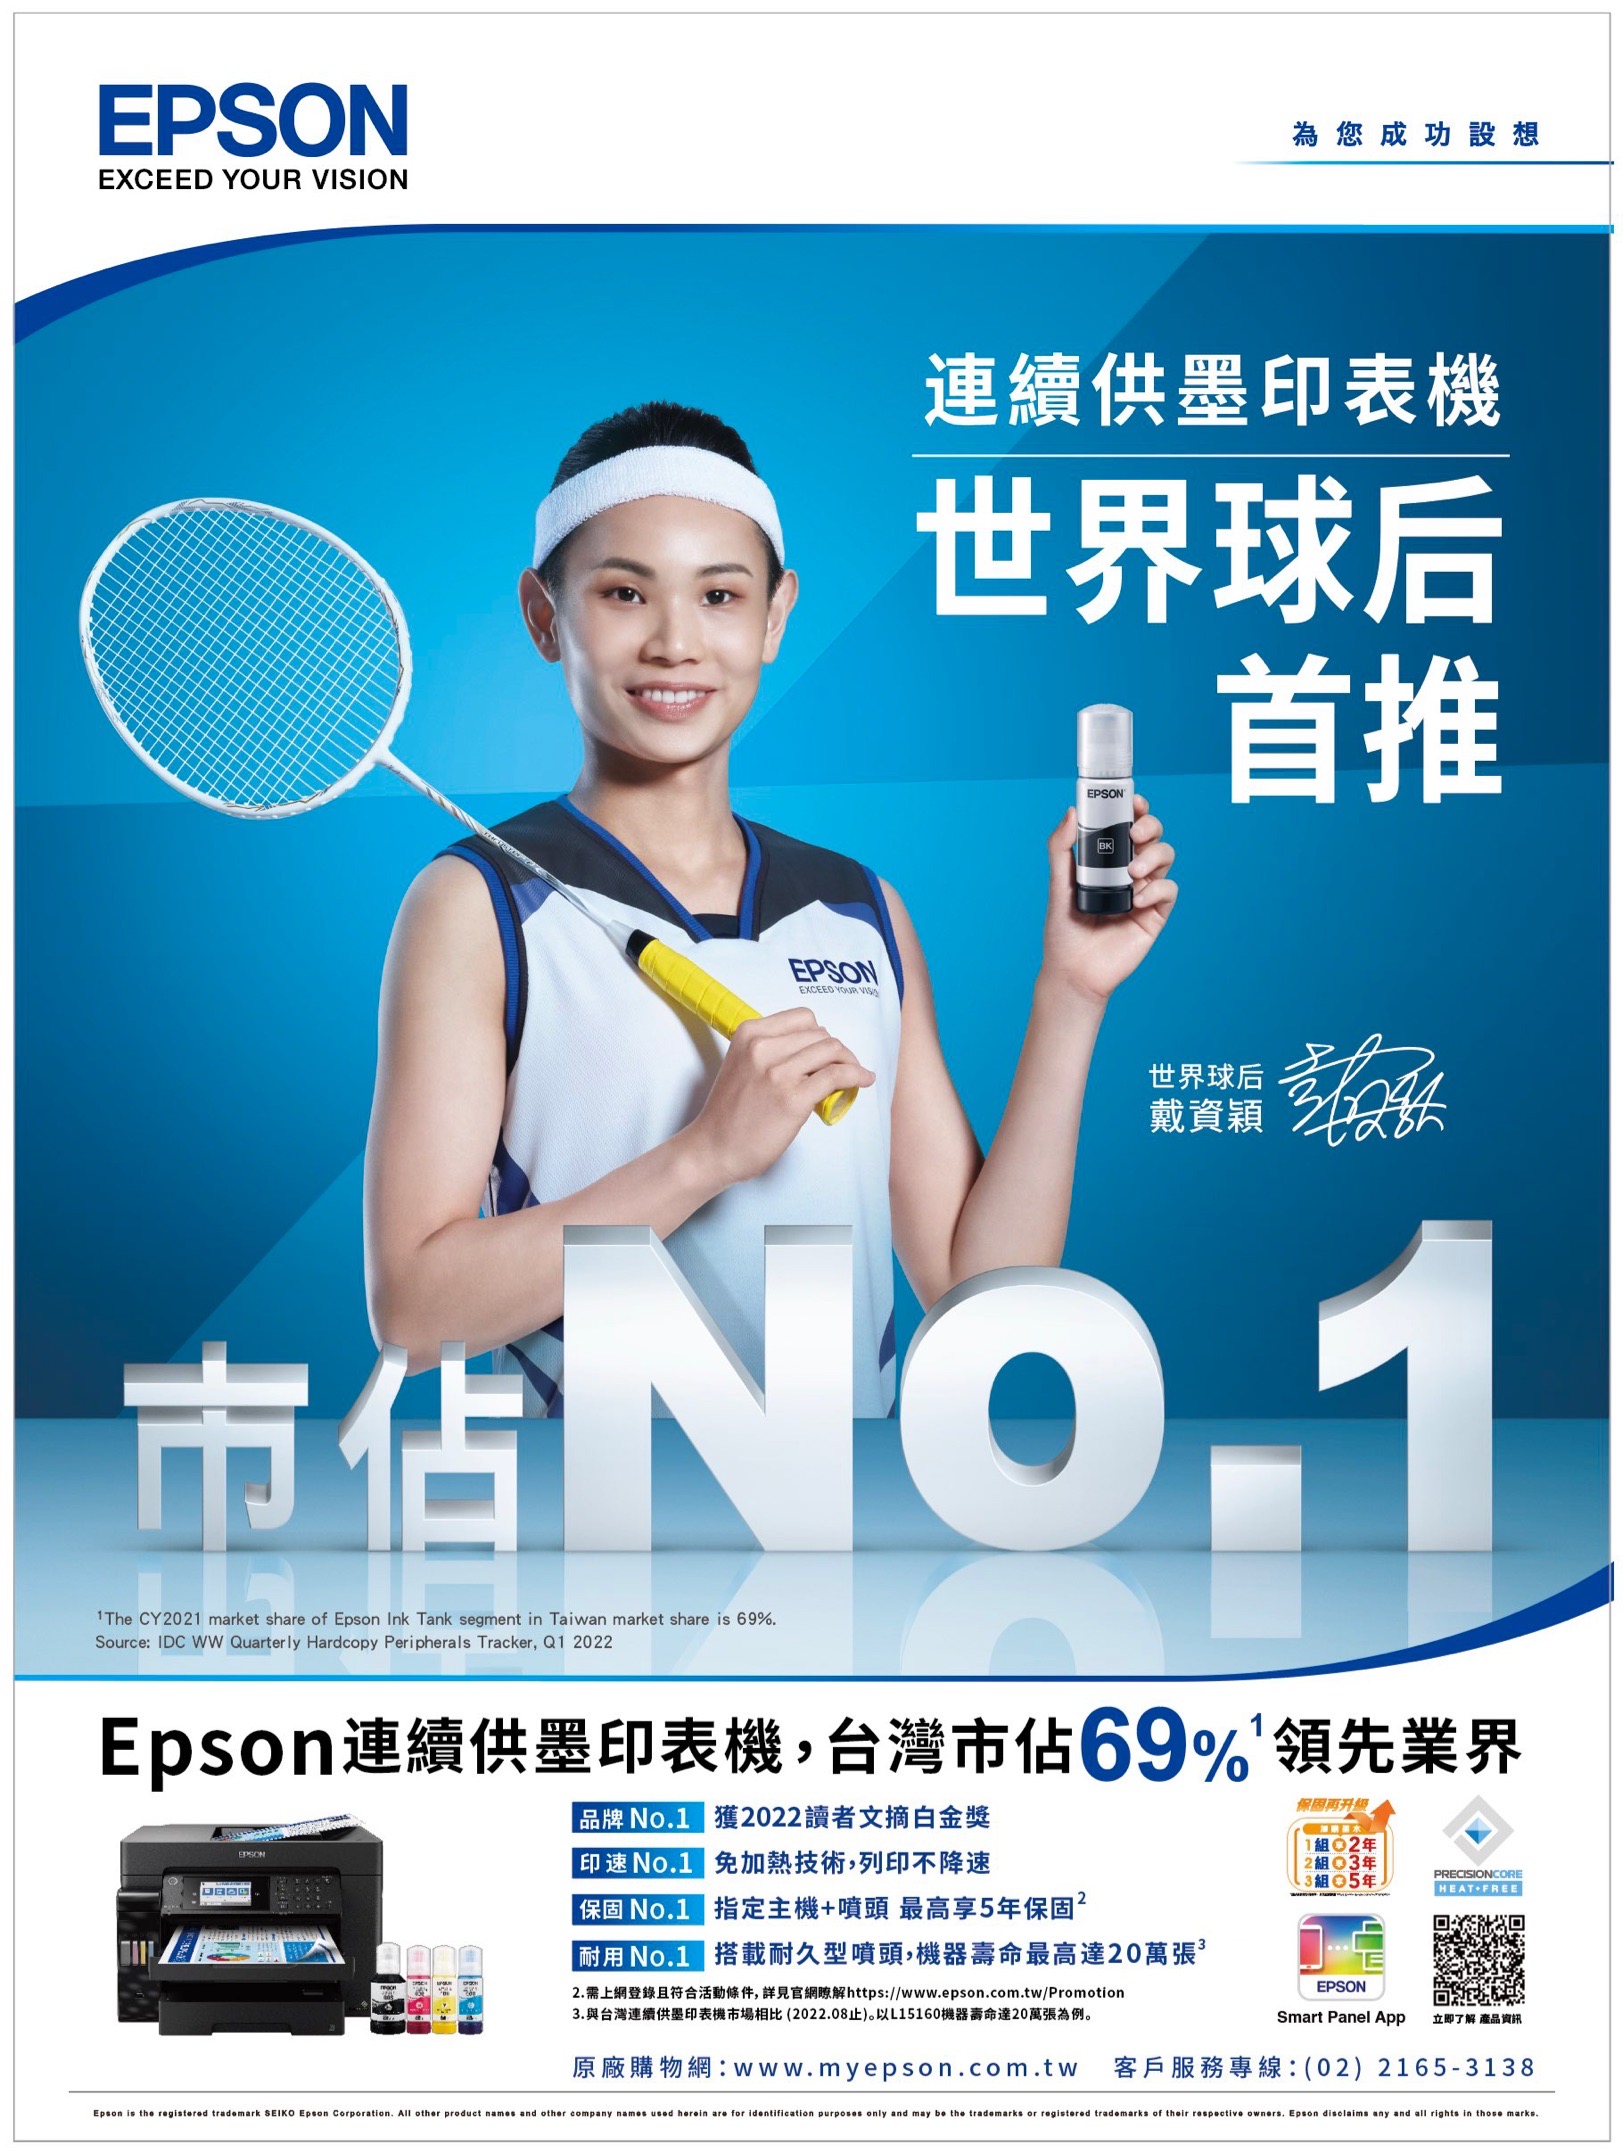 EPSONEXCEED YOUR ONEPSONEXCEED YOUR VISI為您成功設想連續供墨印表機世界球后EPSON首推BK世界球后戴資穎1The CY1 market share of Epson Ink Tank segment in Taiwan market share is 69%.Source: IDC  Quarterly Hardcopy Peripherals Tracker, Q1 2022Epson連續供墨印表機,台灣市佔69%領先業界EPSON品牌 No.1 獲2022讀者文摘白金獎印No.1 免加熱技術,列印不降速保固 No.1 指定主機+噴頭 最高享5保固2耐用 No.1 搭載耐久型噴頭,機器壽命最高達20萬張2. 需上網登錄且符合活動條件,詳見官網瞭解https://www.epson.com.tw/Promotion3.與台灣連續供墨印表機市場相比(2022.08止)。以L15160機器壽命達20萬張為例。保固1022組年組 5年PRECISIONCORE HEAT+FREEEPSONSmart Panel App立即了解 產品資訊原廠購物網:www.myepson.com.tw 客戶服務專線:(02)2165-3138Epson is the registered trademark SEIKO Epson Corporation. All other product names and other company names used herein are for identification purposes only and may  the trademarks or registered trademarks of their respective owners. Epson disclaims any and all rights in those marks.